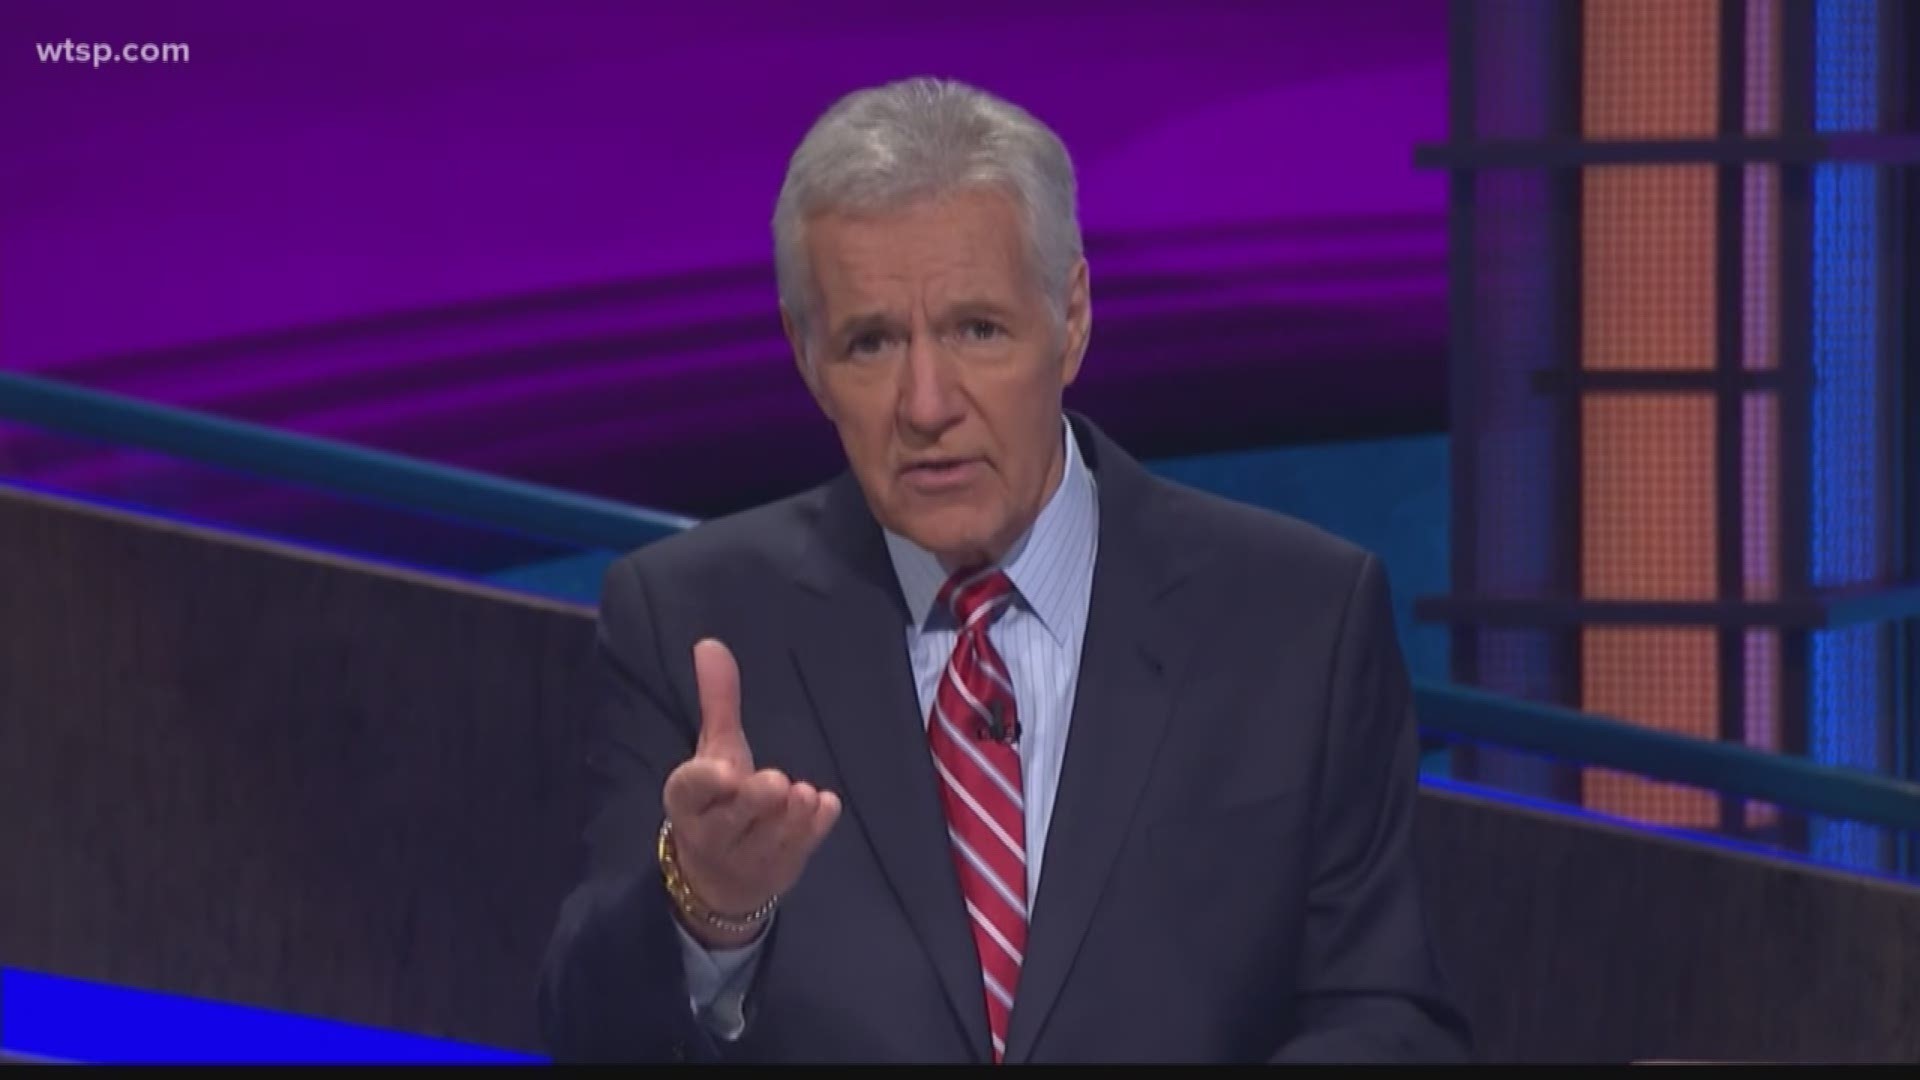 Alex Trebek has been diagnosed with stage 4 pancreatic cancer. The 78-year-old 'Jeopardy!' host revealed the diagnosis Wednesday in a YouTube video.